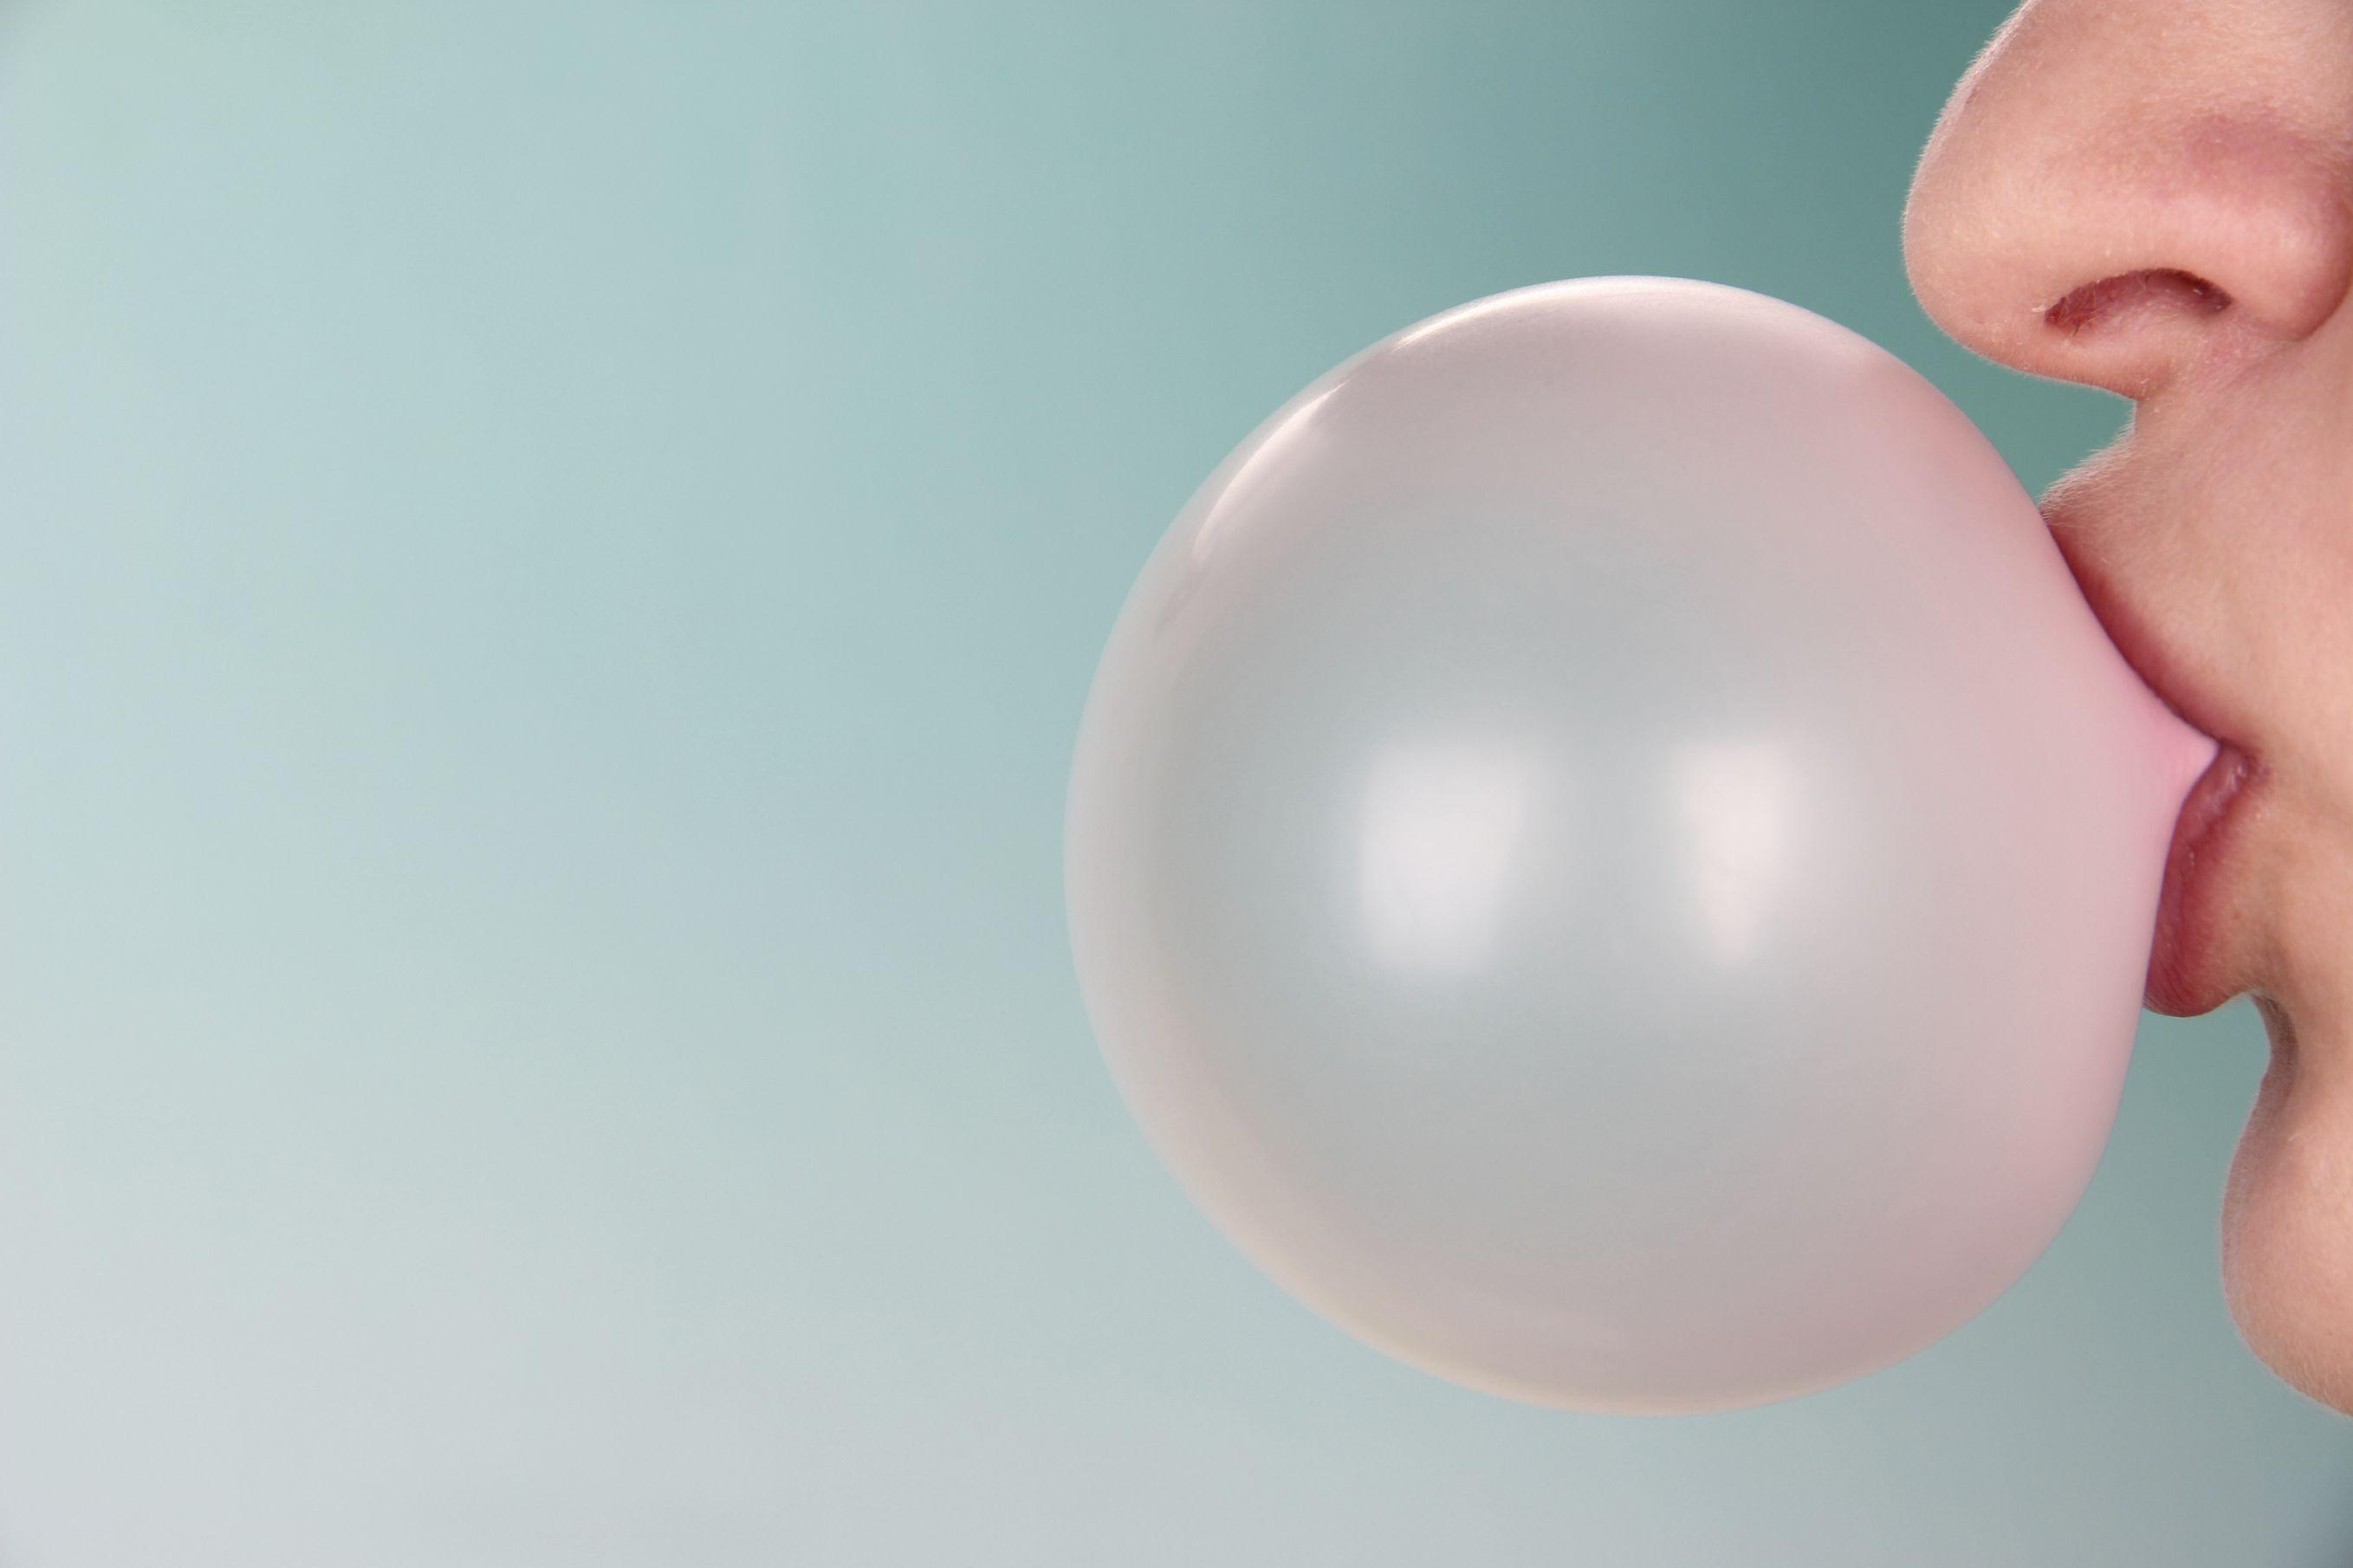 Bubbles Of Chewing Gum Wallpaper High Quality